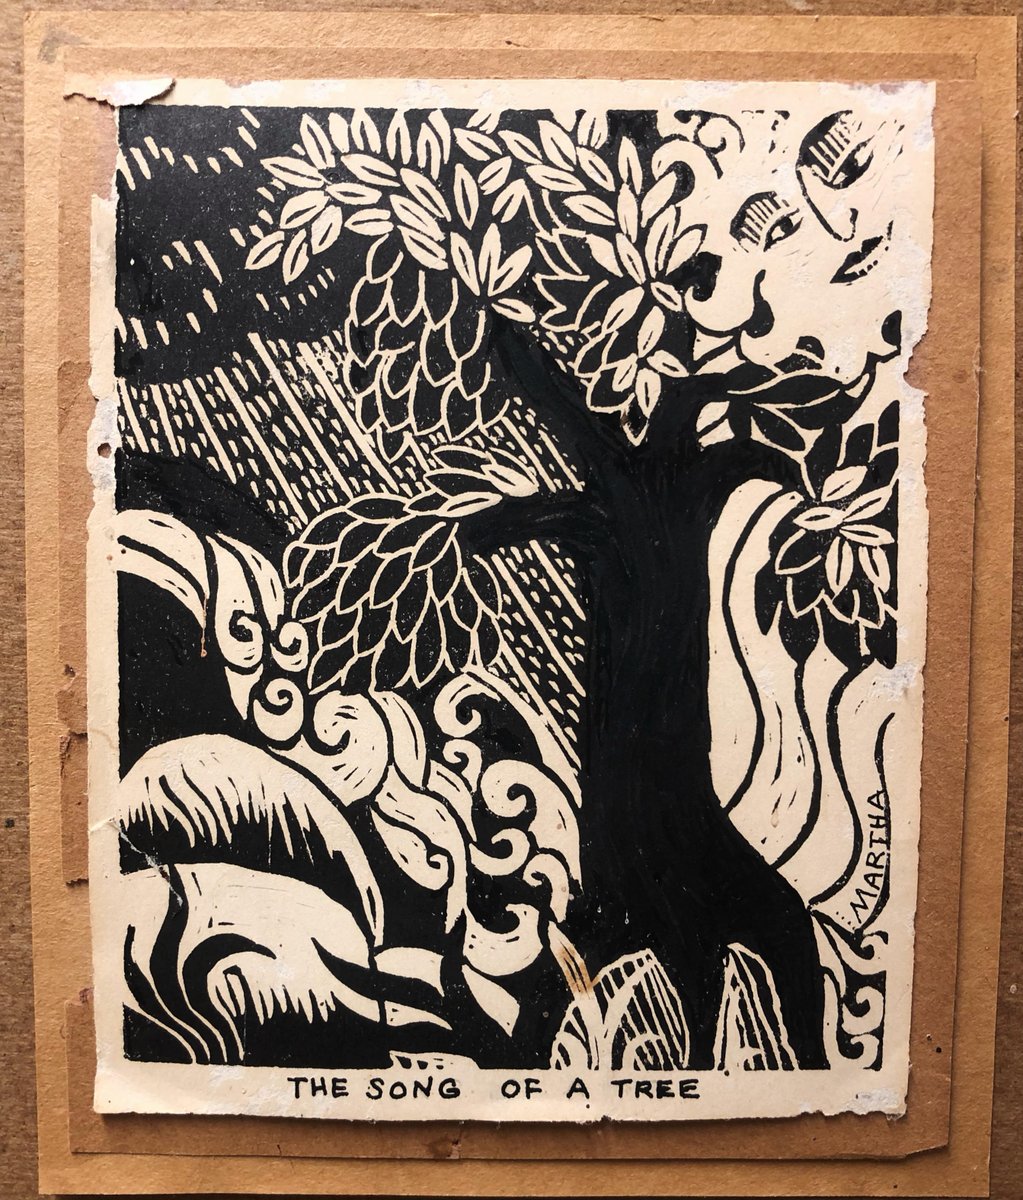 'The Song of a Tree' artwork by Martha Shaw on display in our library's Robert Swann Special Collection. Caption: 'Happy Birthday to Robert Swann - Friend of the Trees (1981). Read about our co-founder's long pursuit of a just, regenerative economics. centerforneweconomics.org/envision/legac…